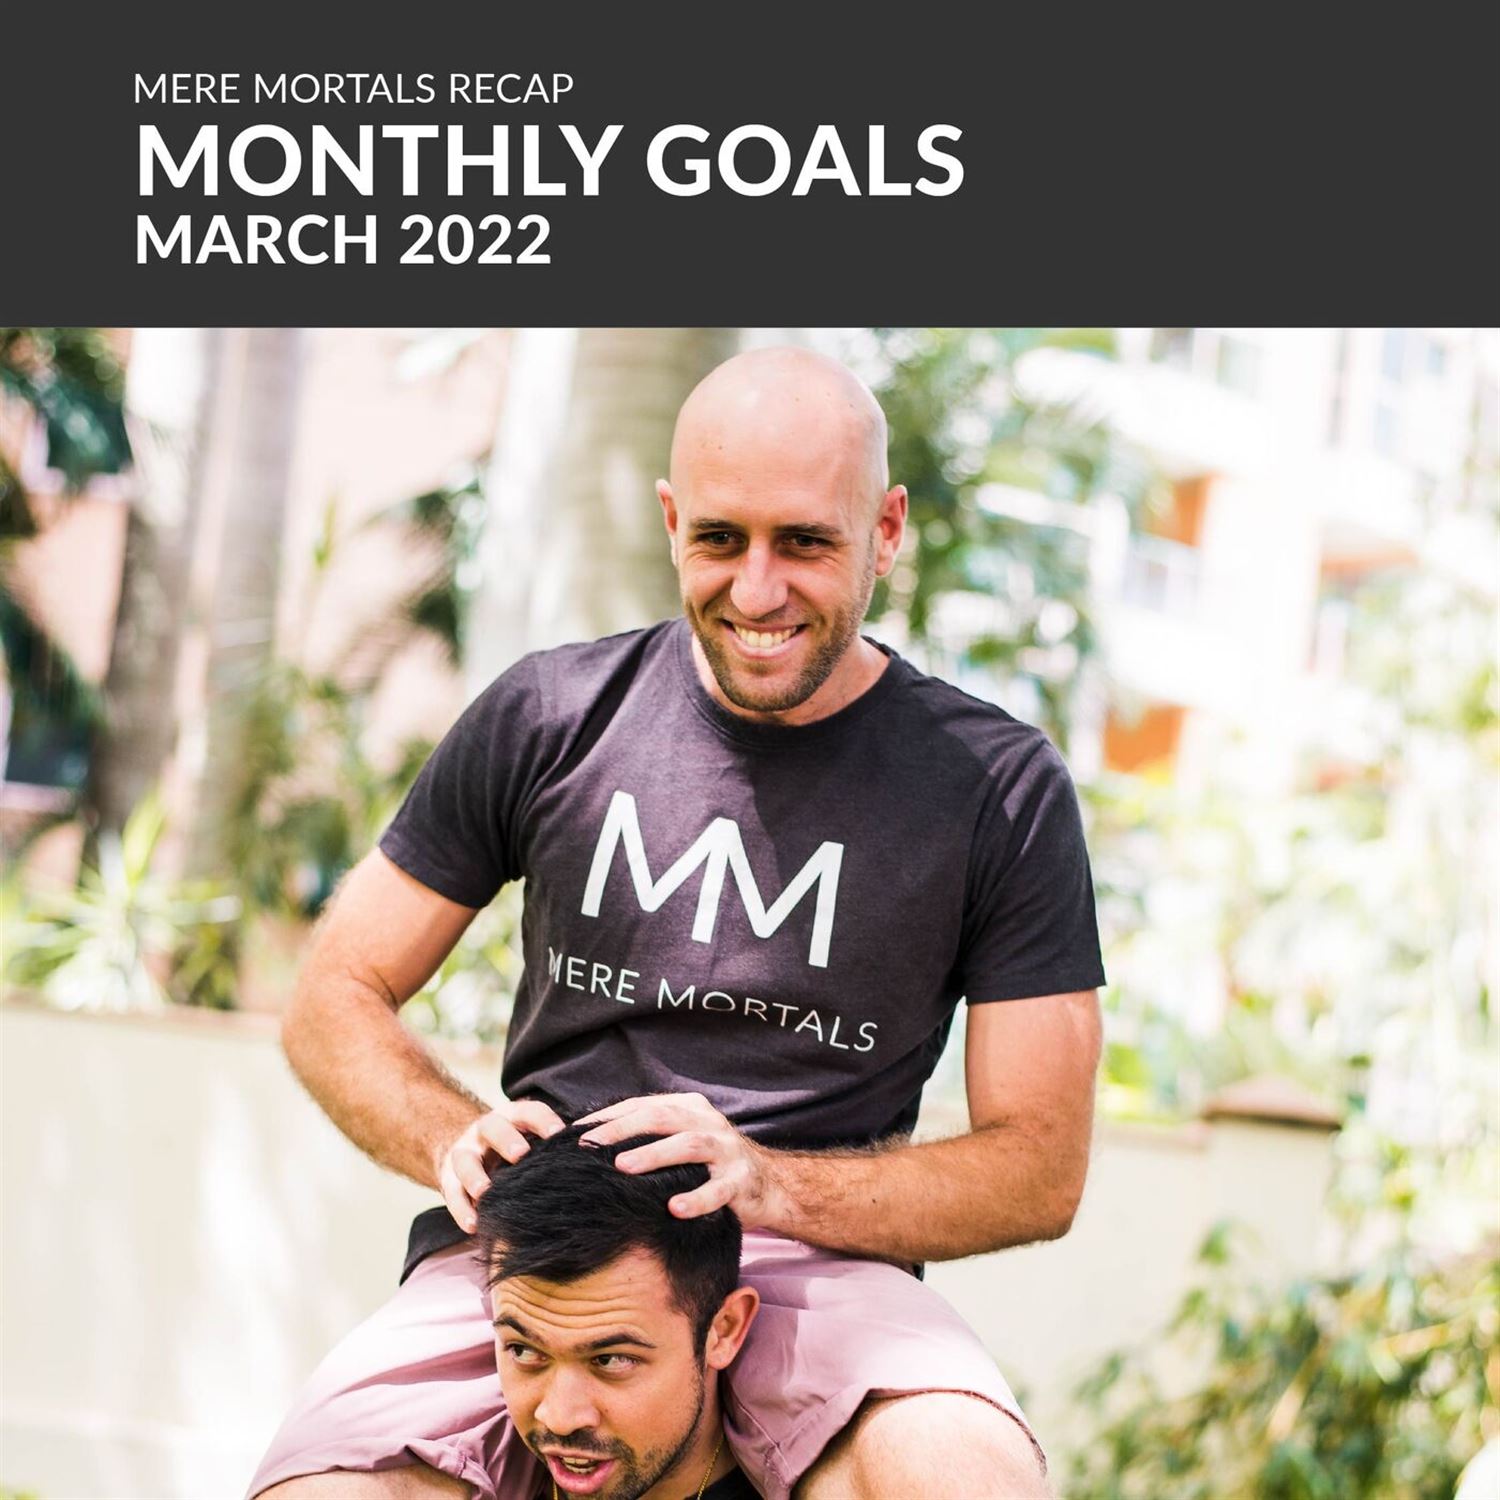 Monthly Goals - March 2022